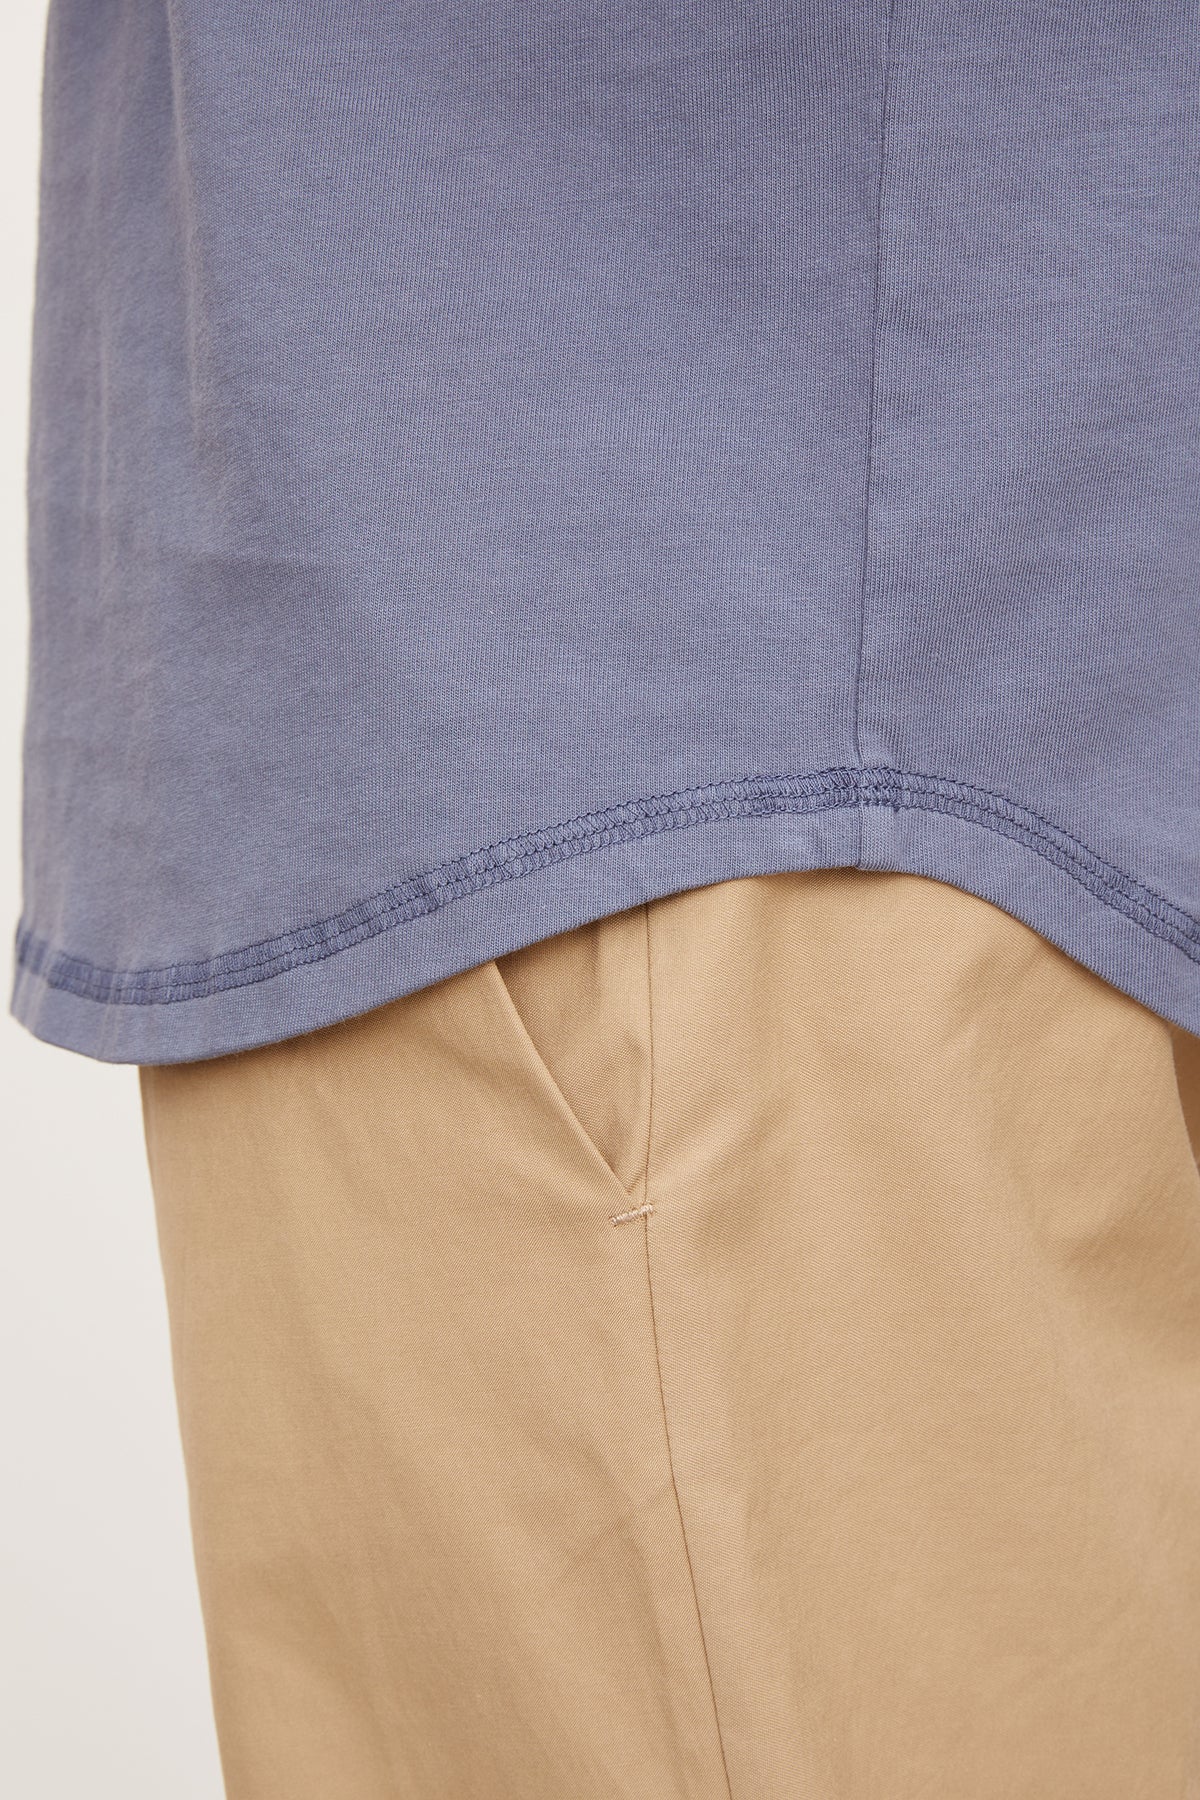 Close-up of a blue cotton knit DEON HENLEY shirt hem over beige trousers, focusing on the fabric and stitching detail by Velvet by Graham & Spencer.-36918612033729